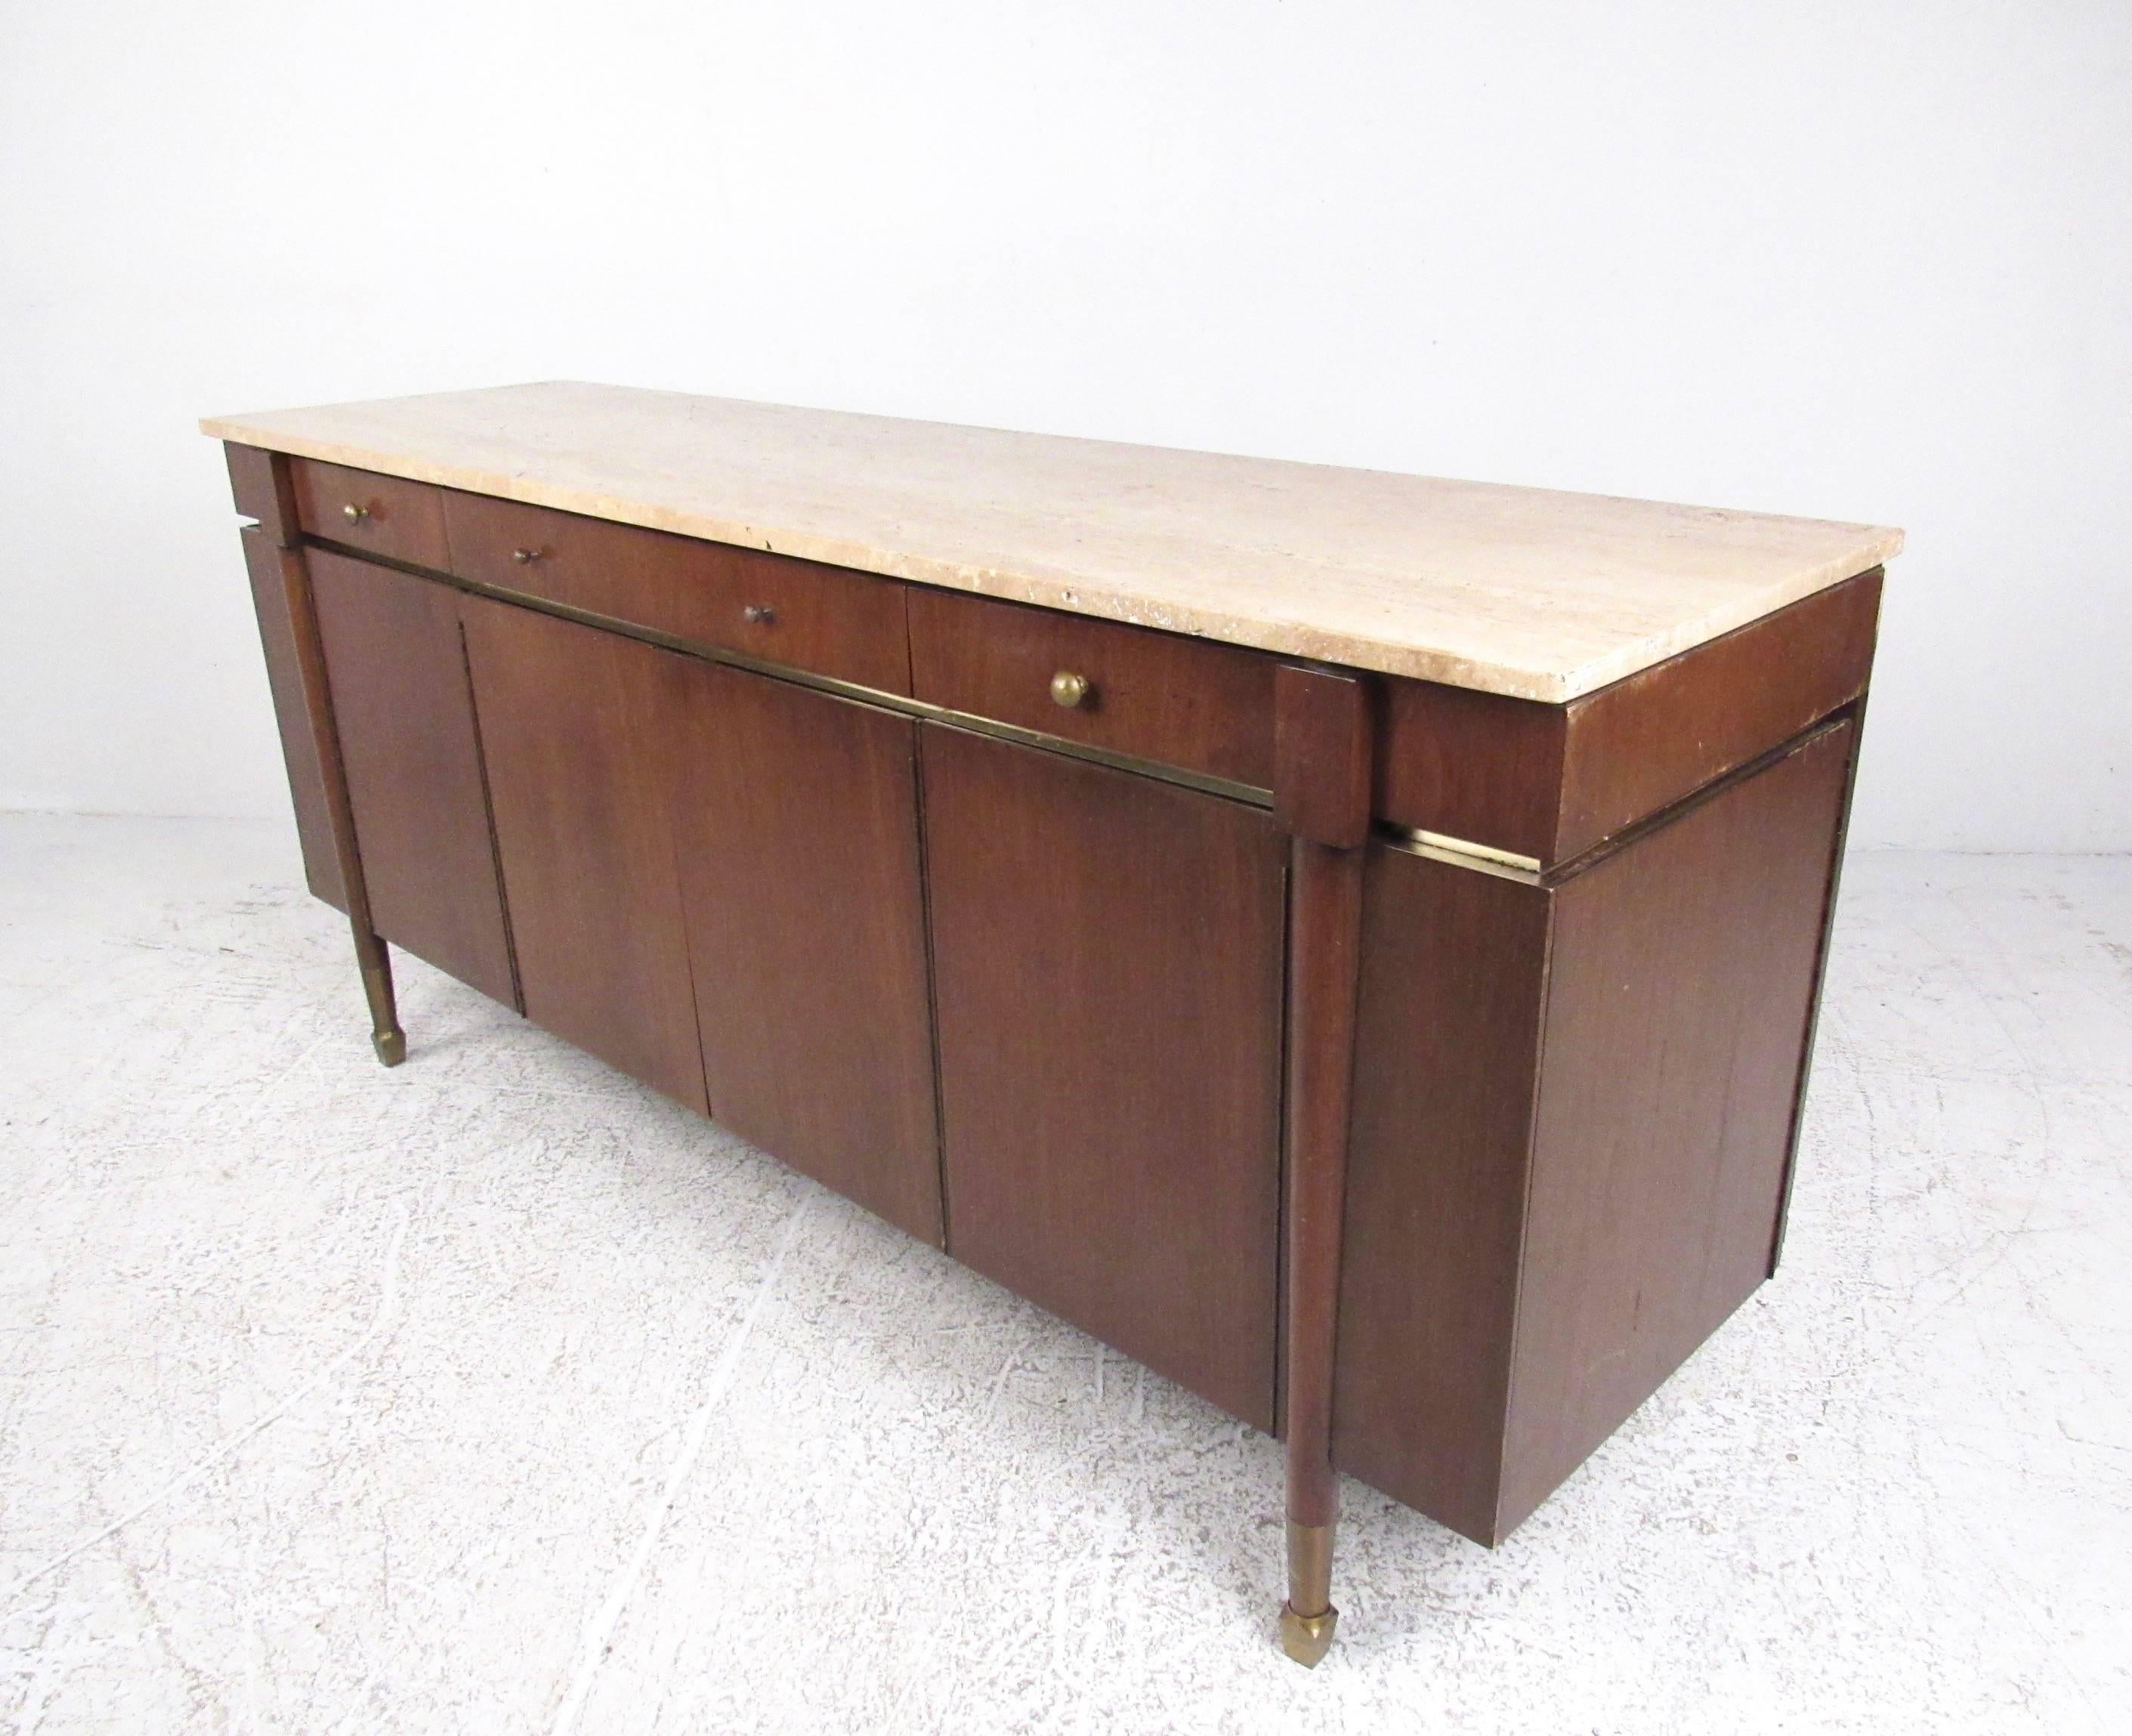 Vintage Travertine Top Sideboard by Paul McCobb In Good Condition For Sale In Brooklyn, NY